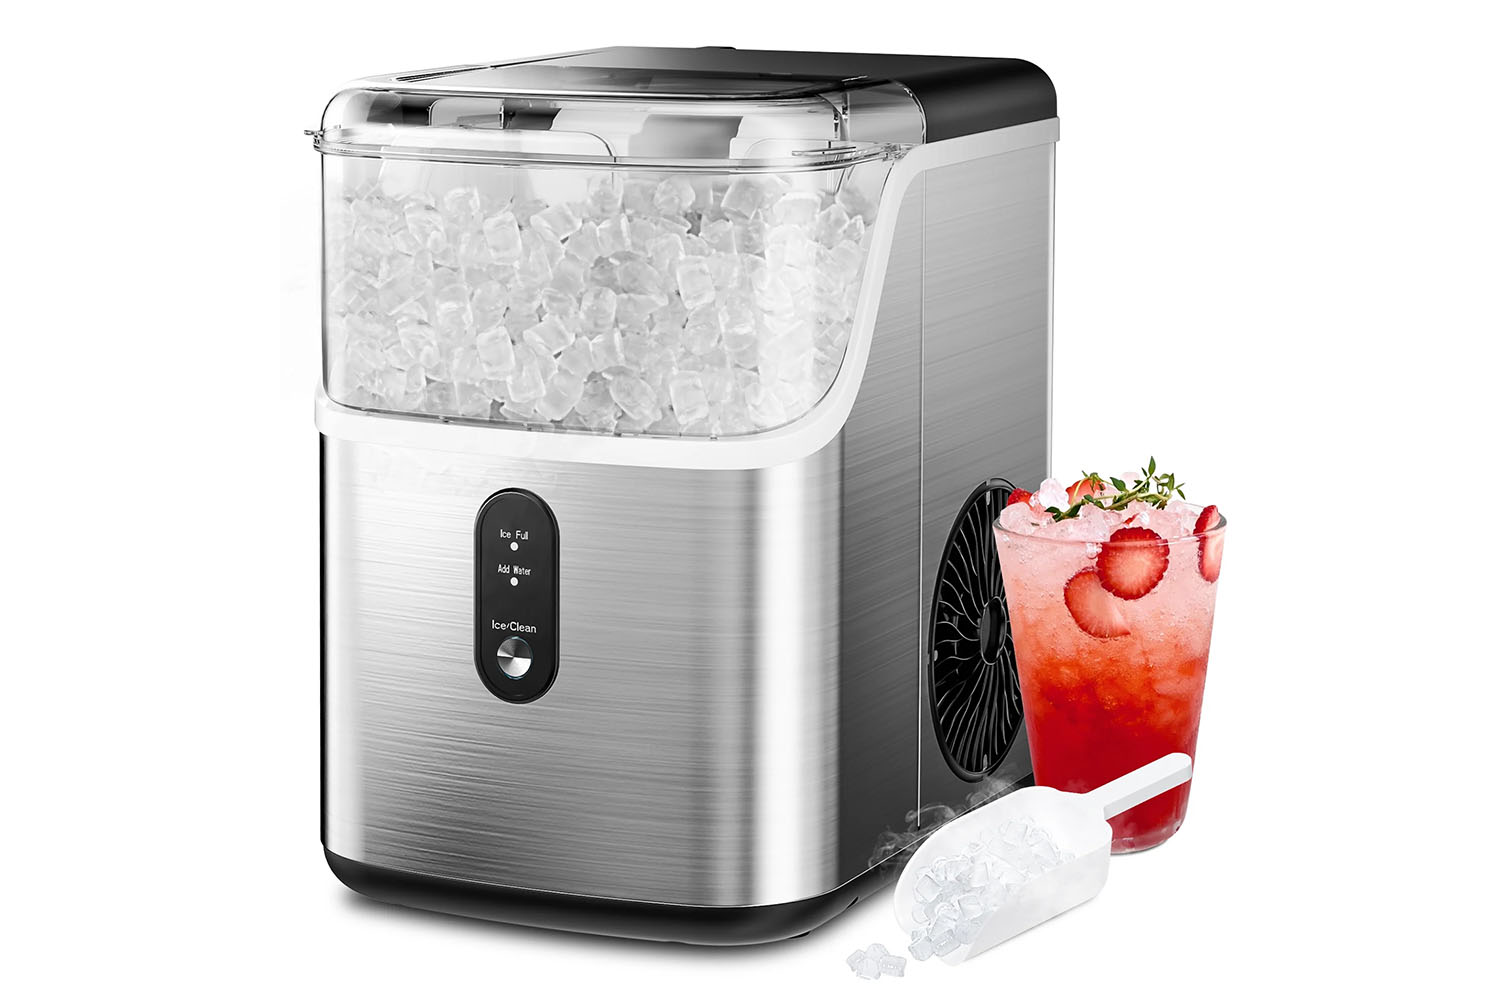 The Simzlife nugget ice maker on a white background.